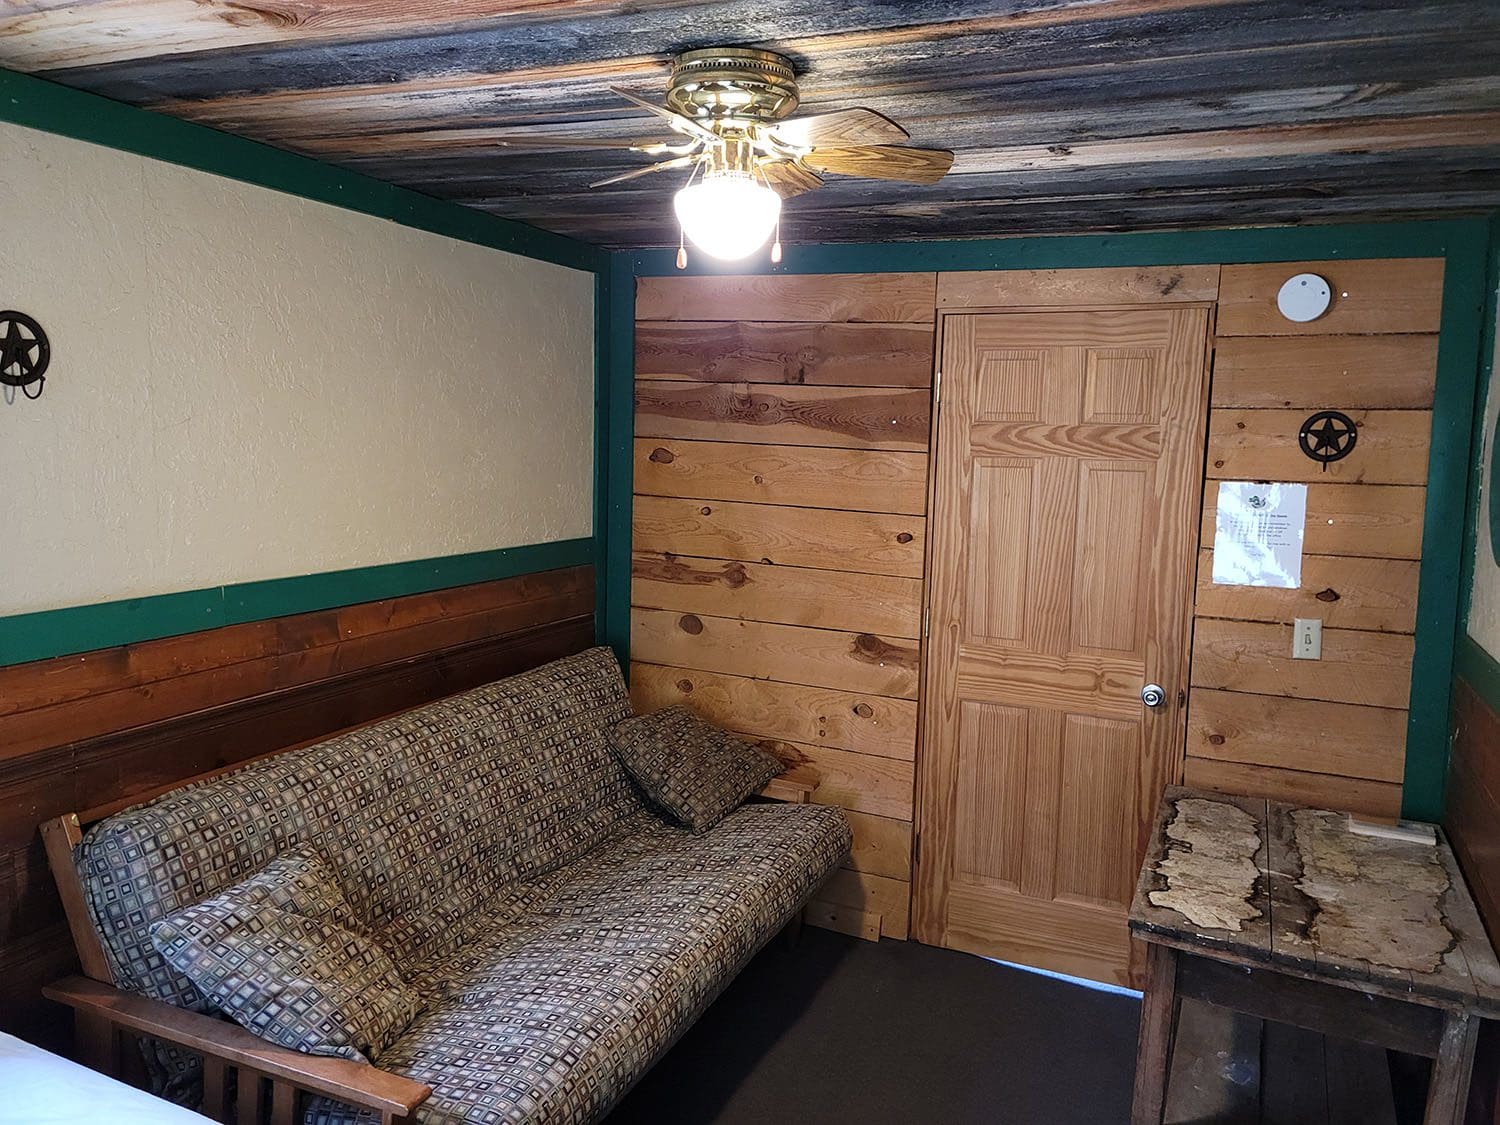 Sitting Bull bedroom with futon and table